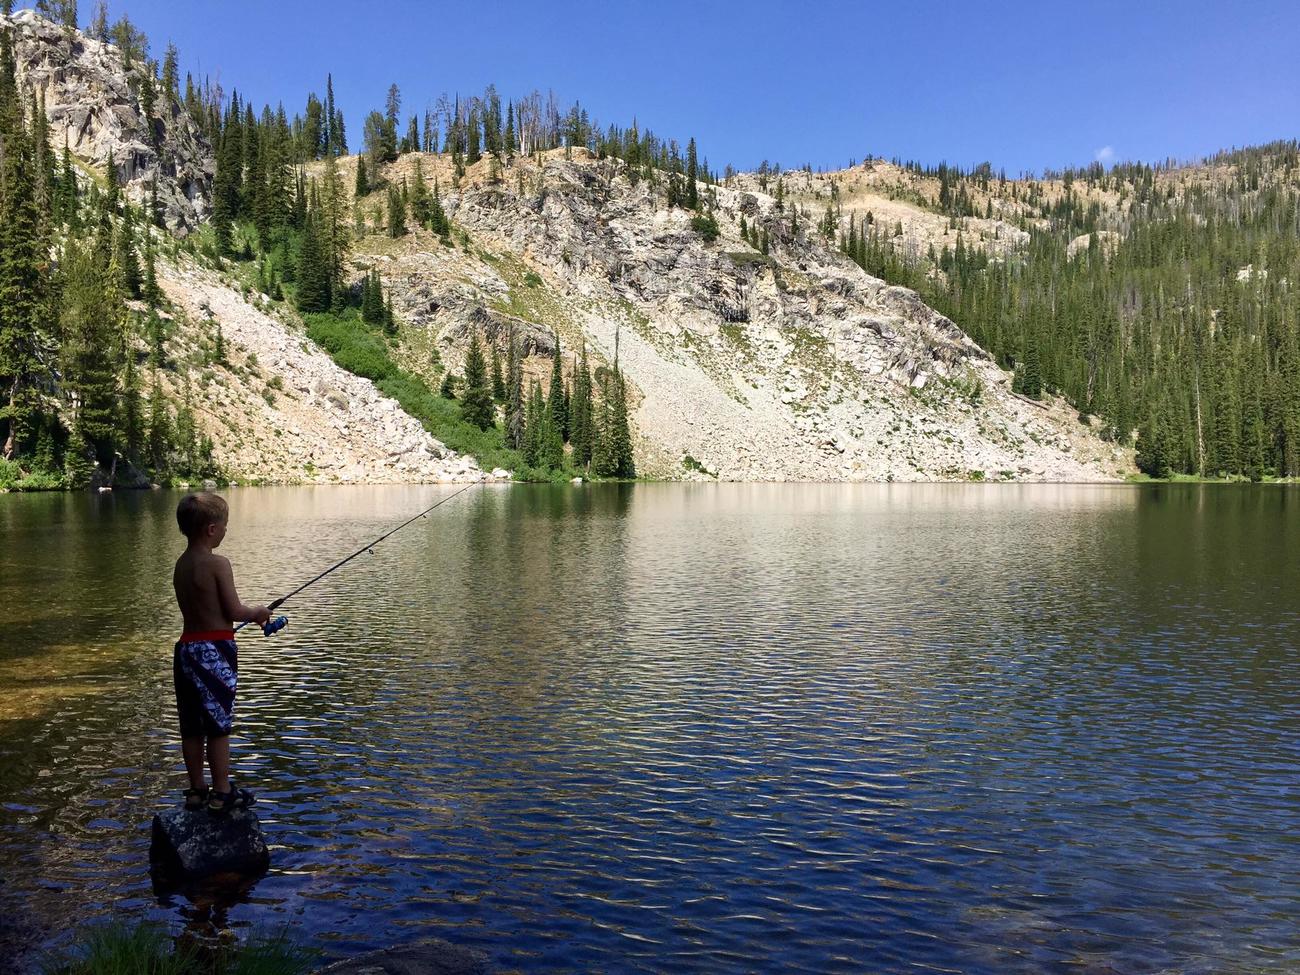 A boy wearing a swim suit fishes at an alpine lake.